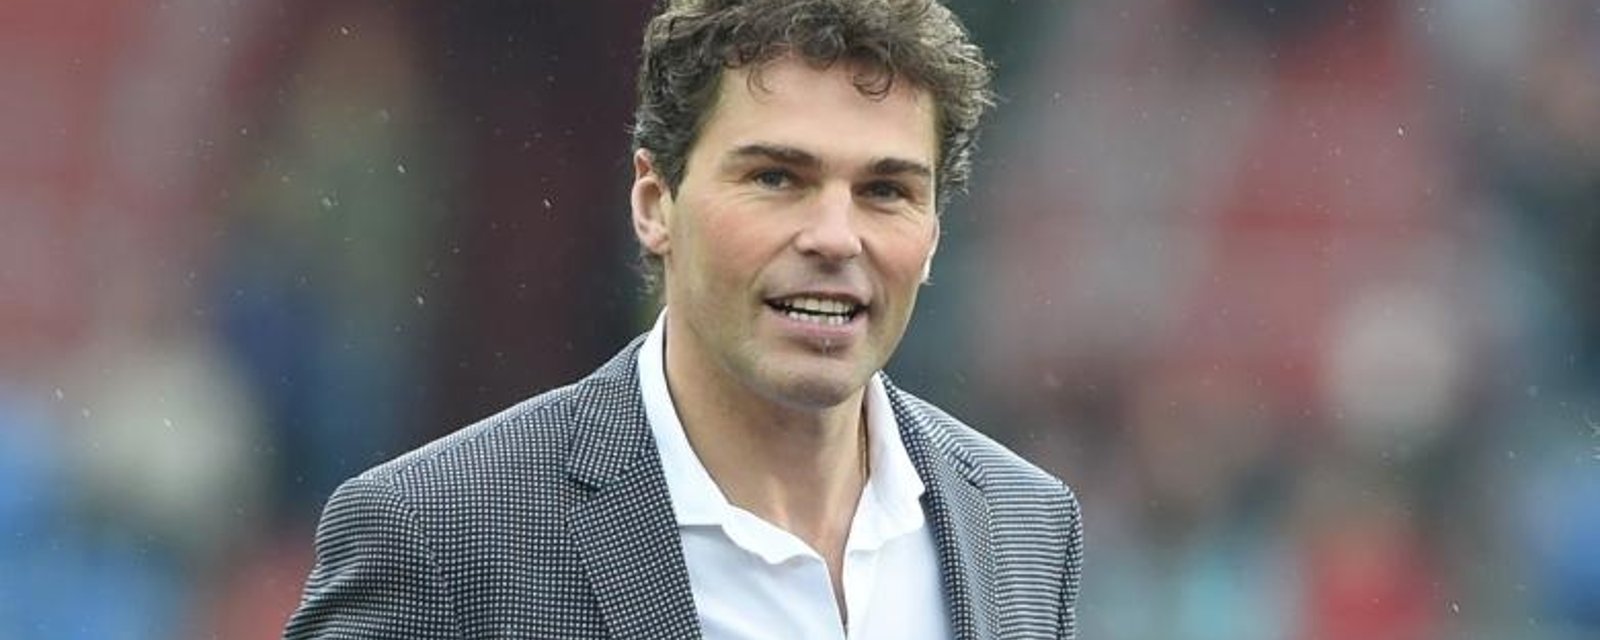 Jaromir Jagr has made a small fortune in the NHL!